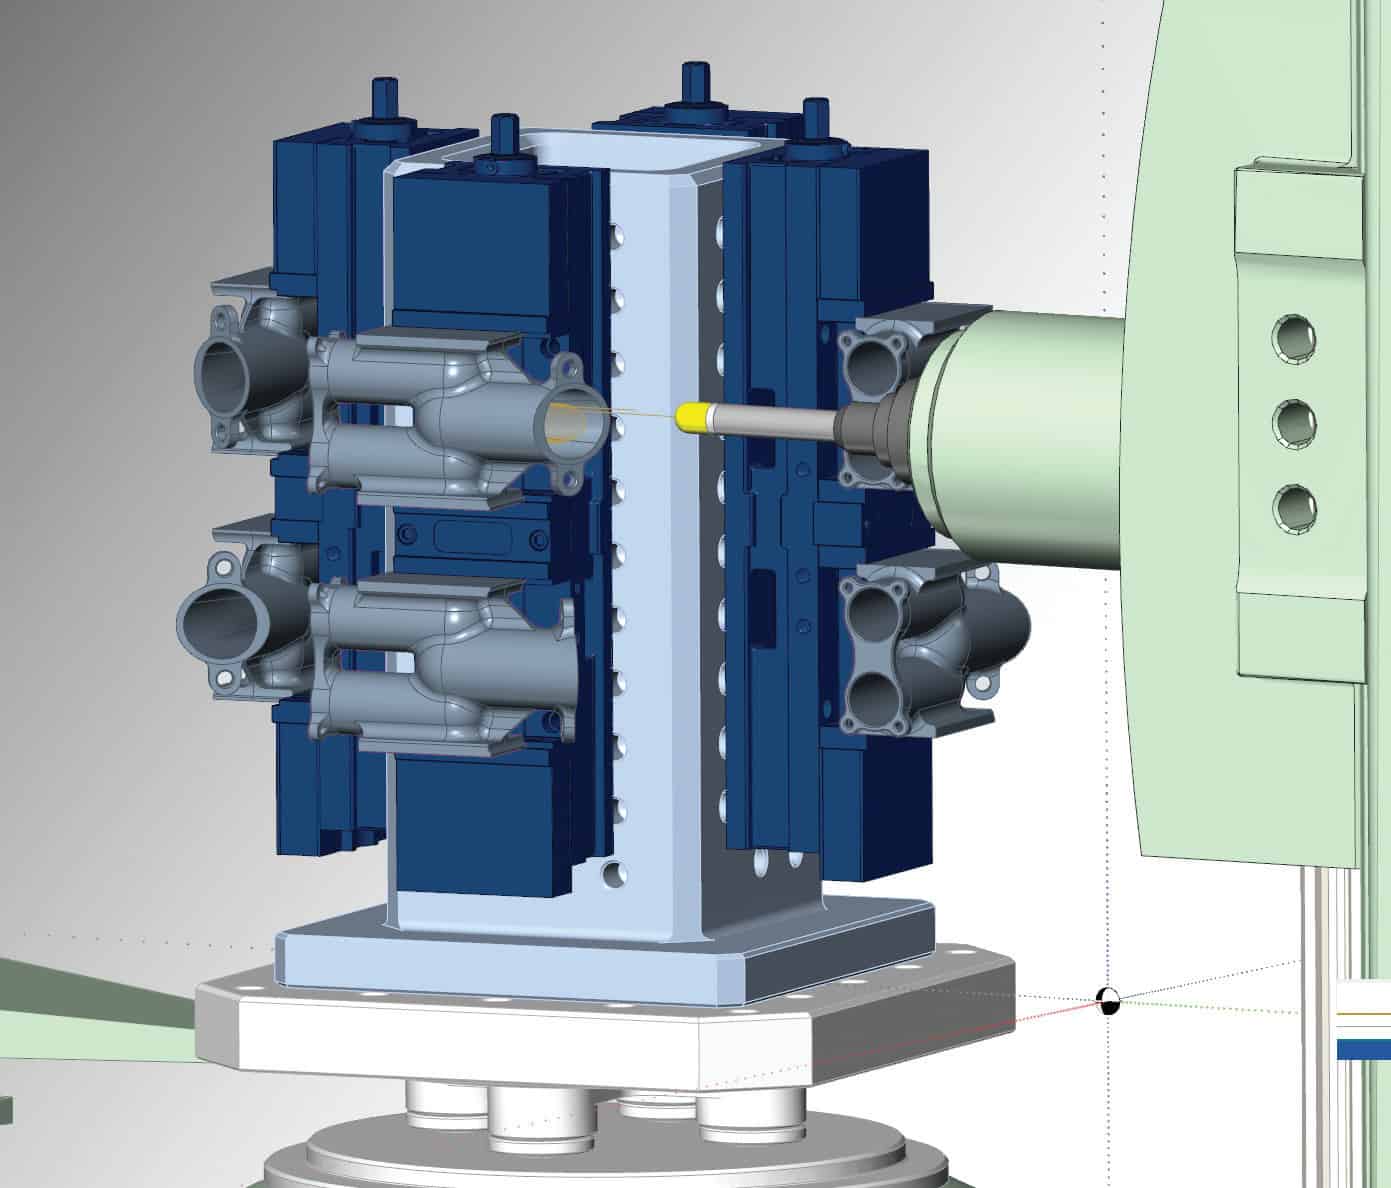 mastercam for solidworks training